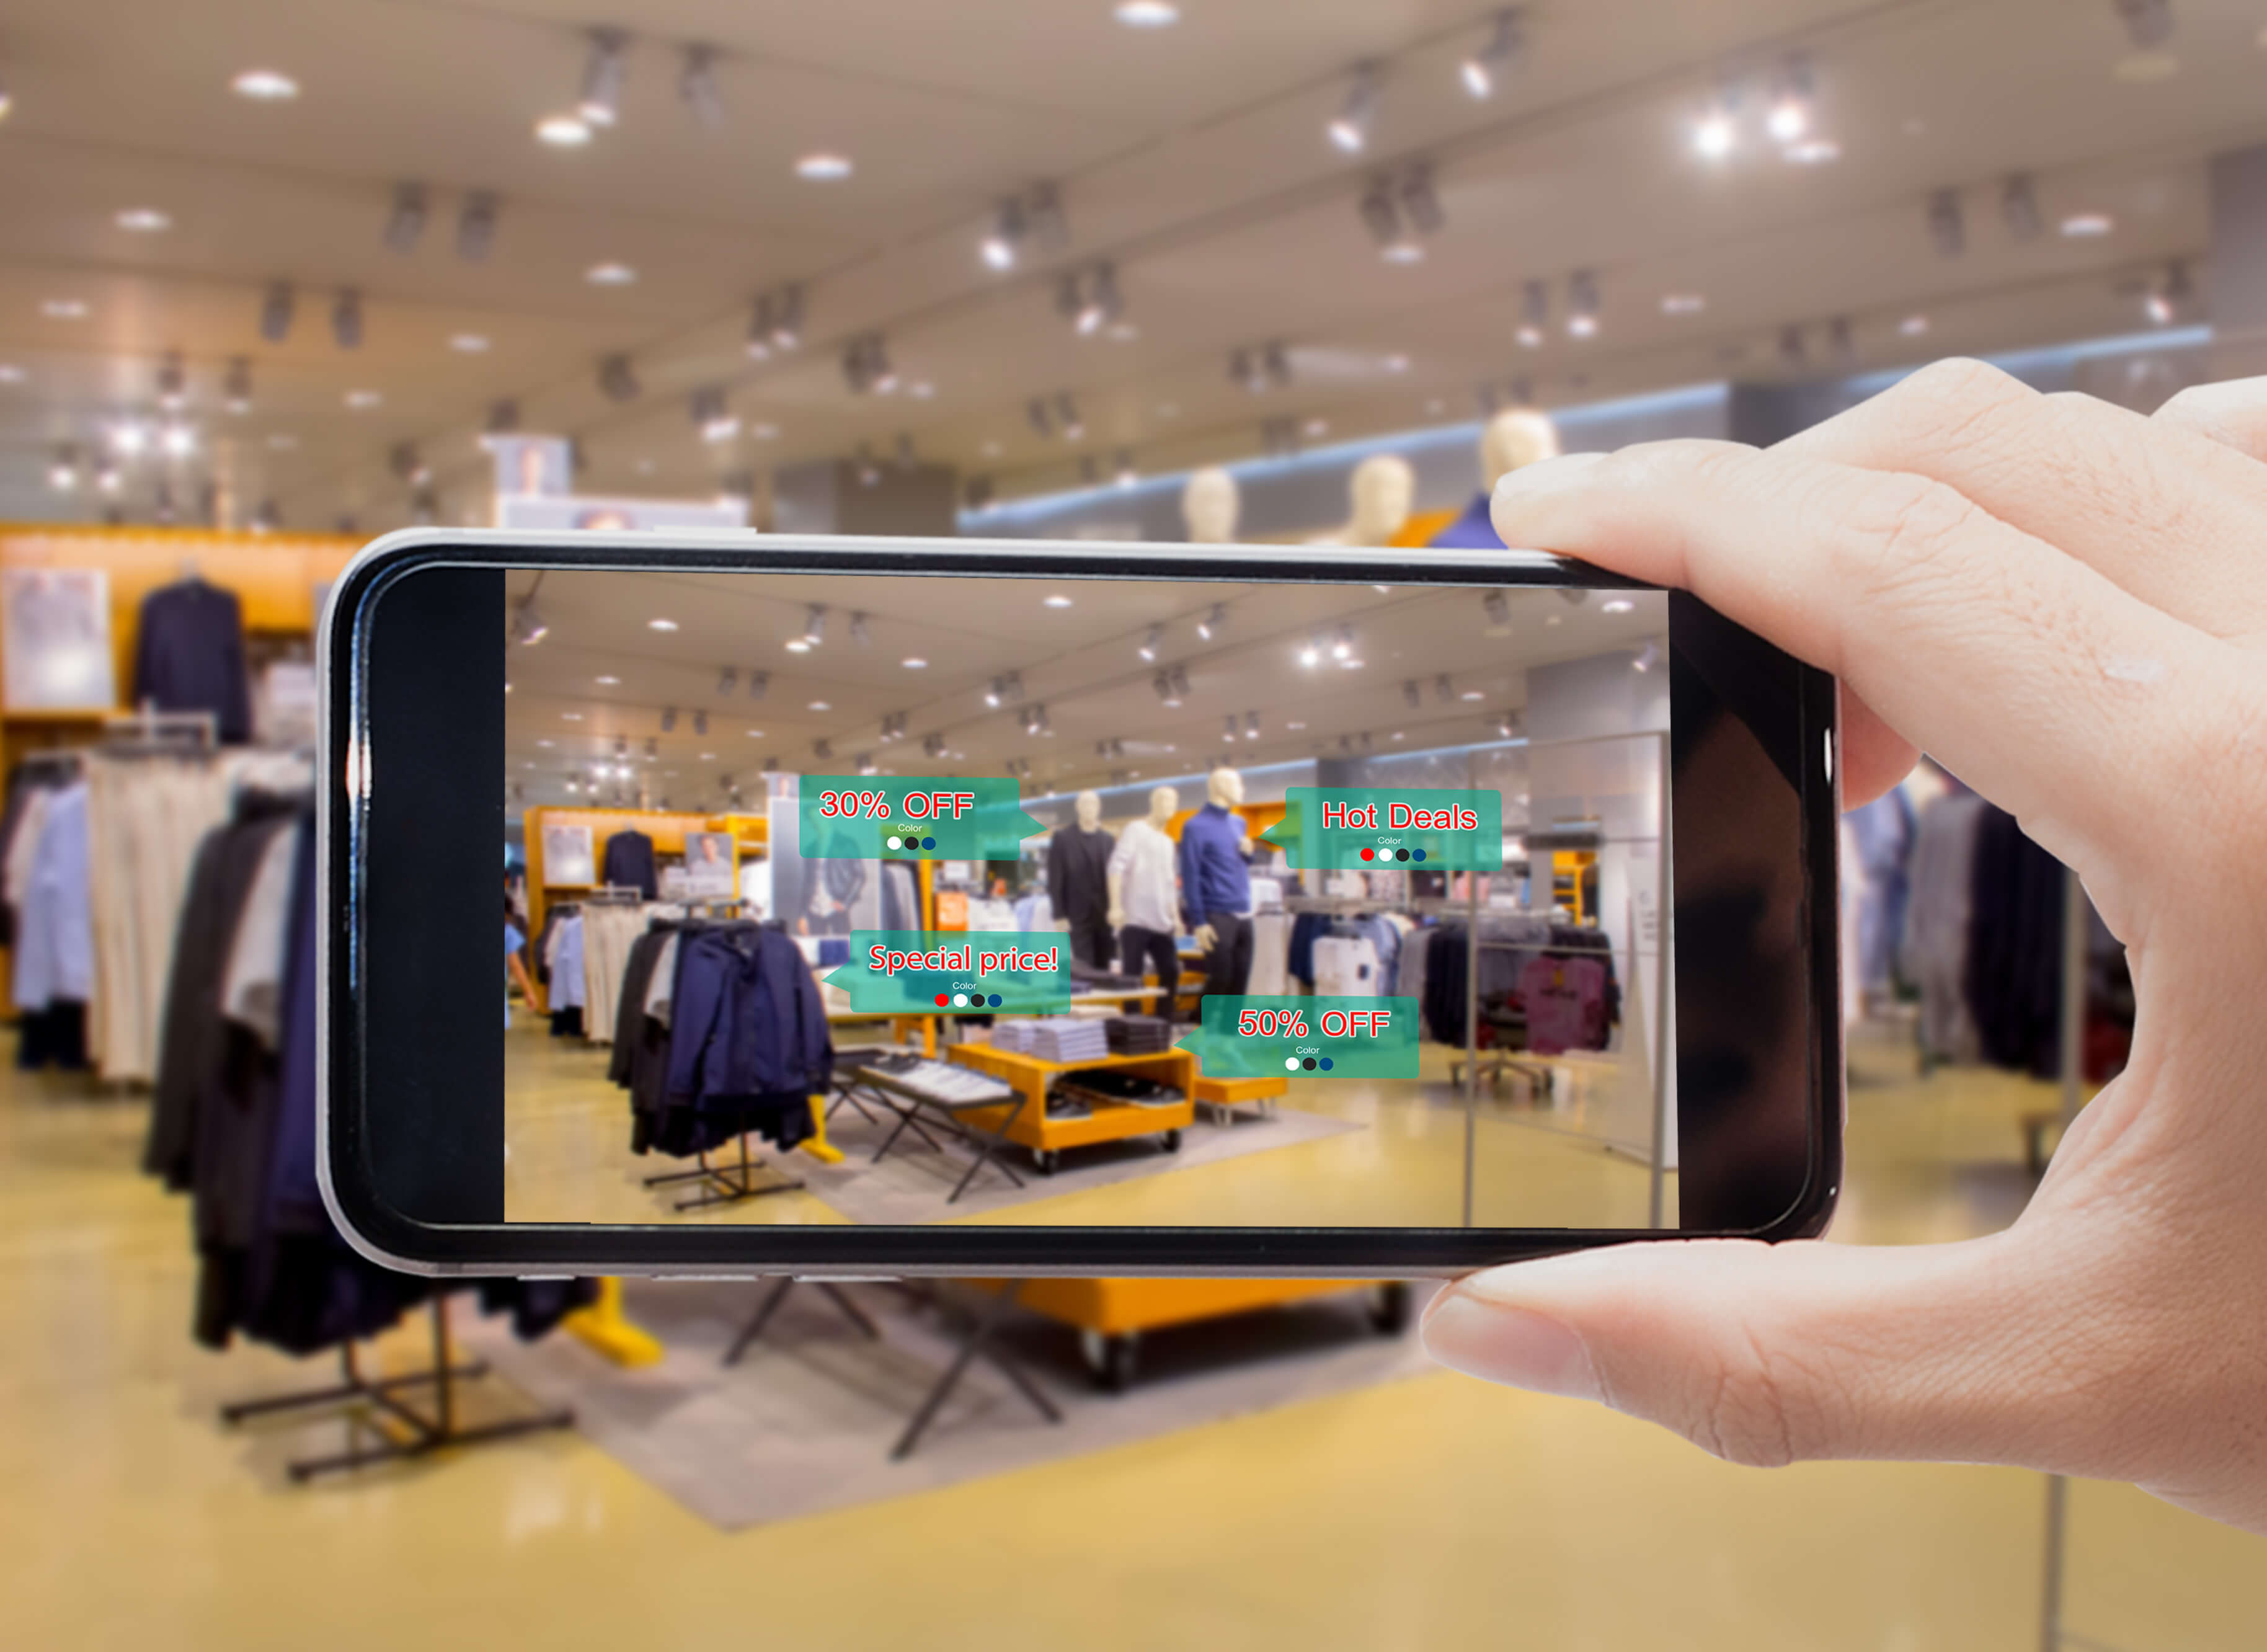 Augmented reality is one trend which could pick up.